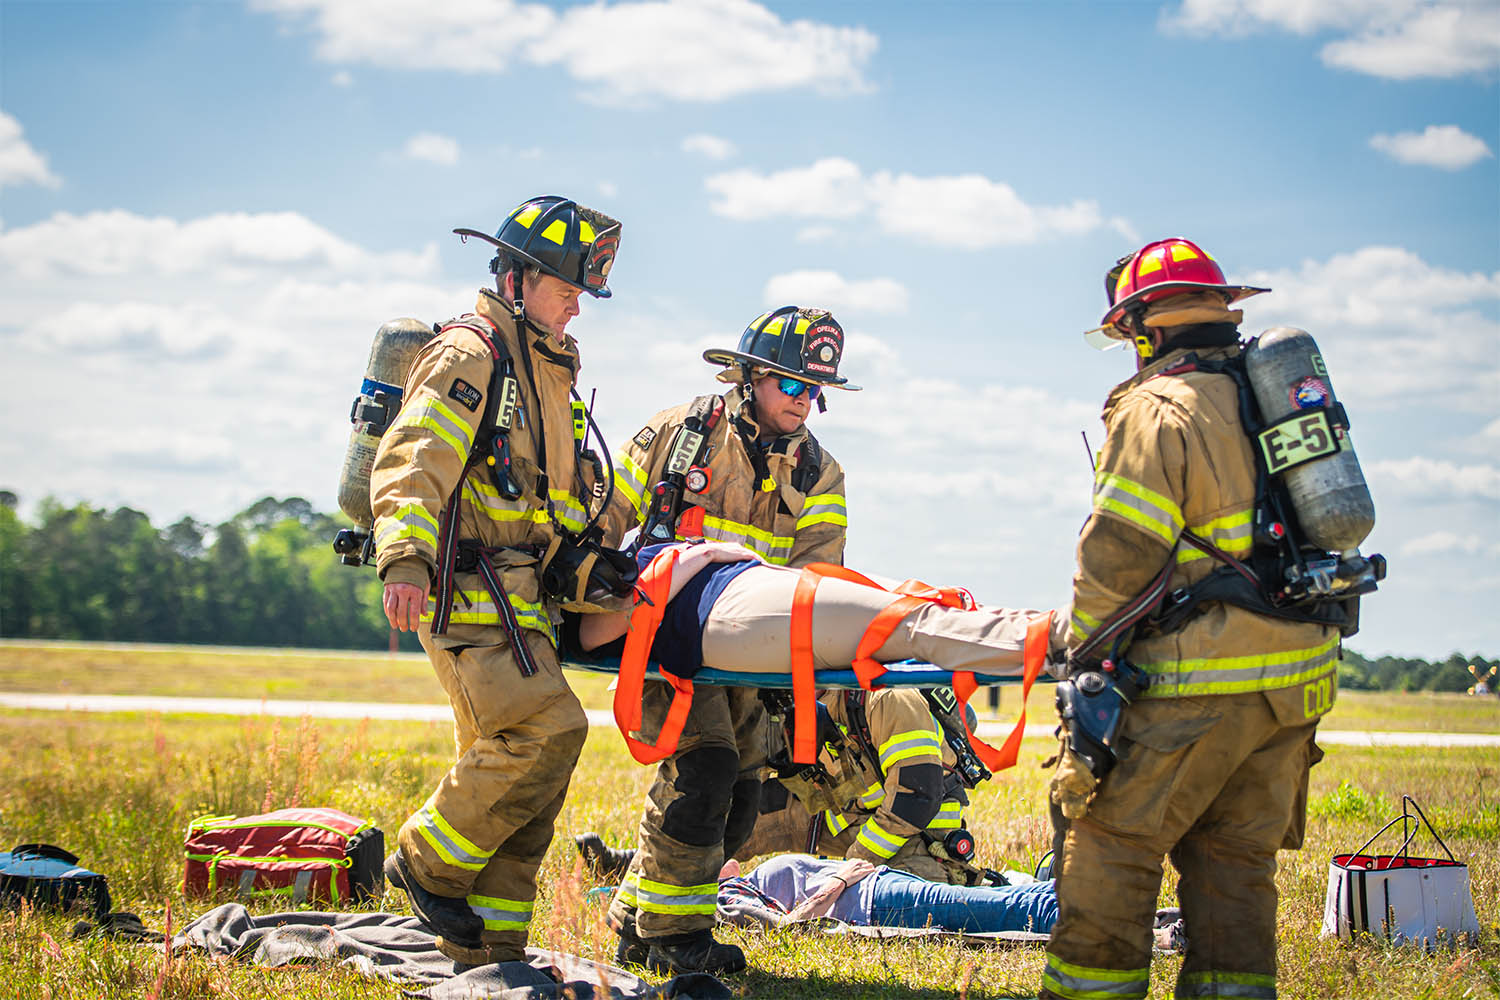 Fireman carrying injured person on stretcher during Auburn Aviation disaster drill